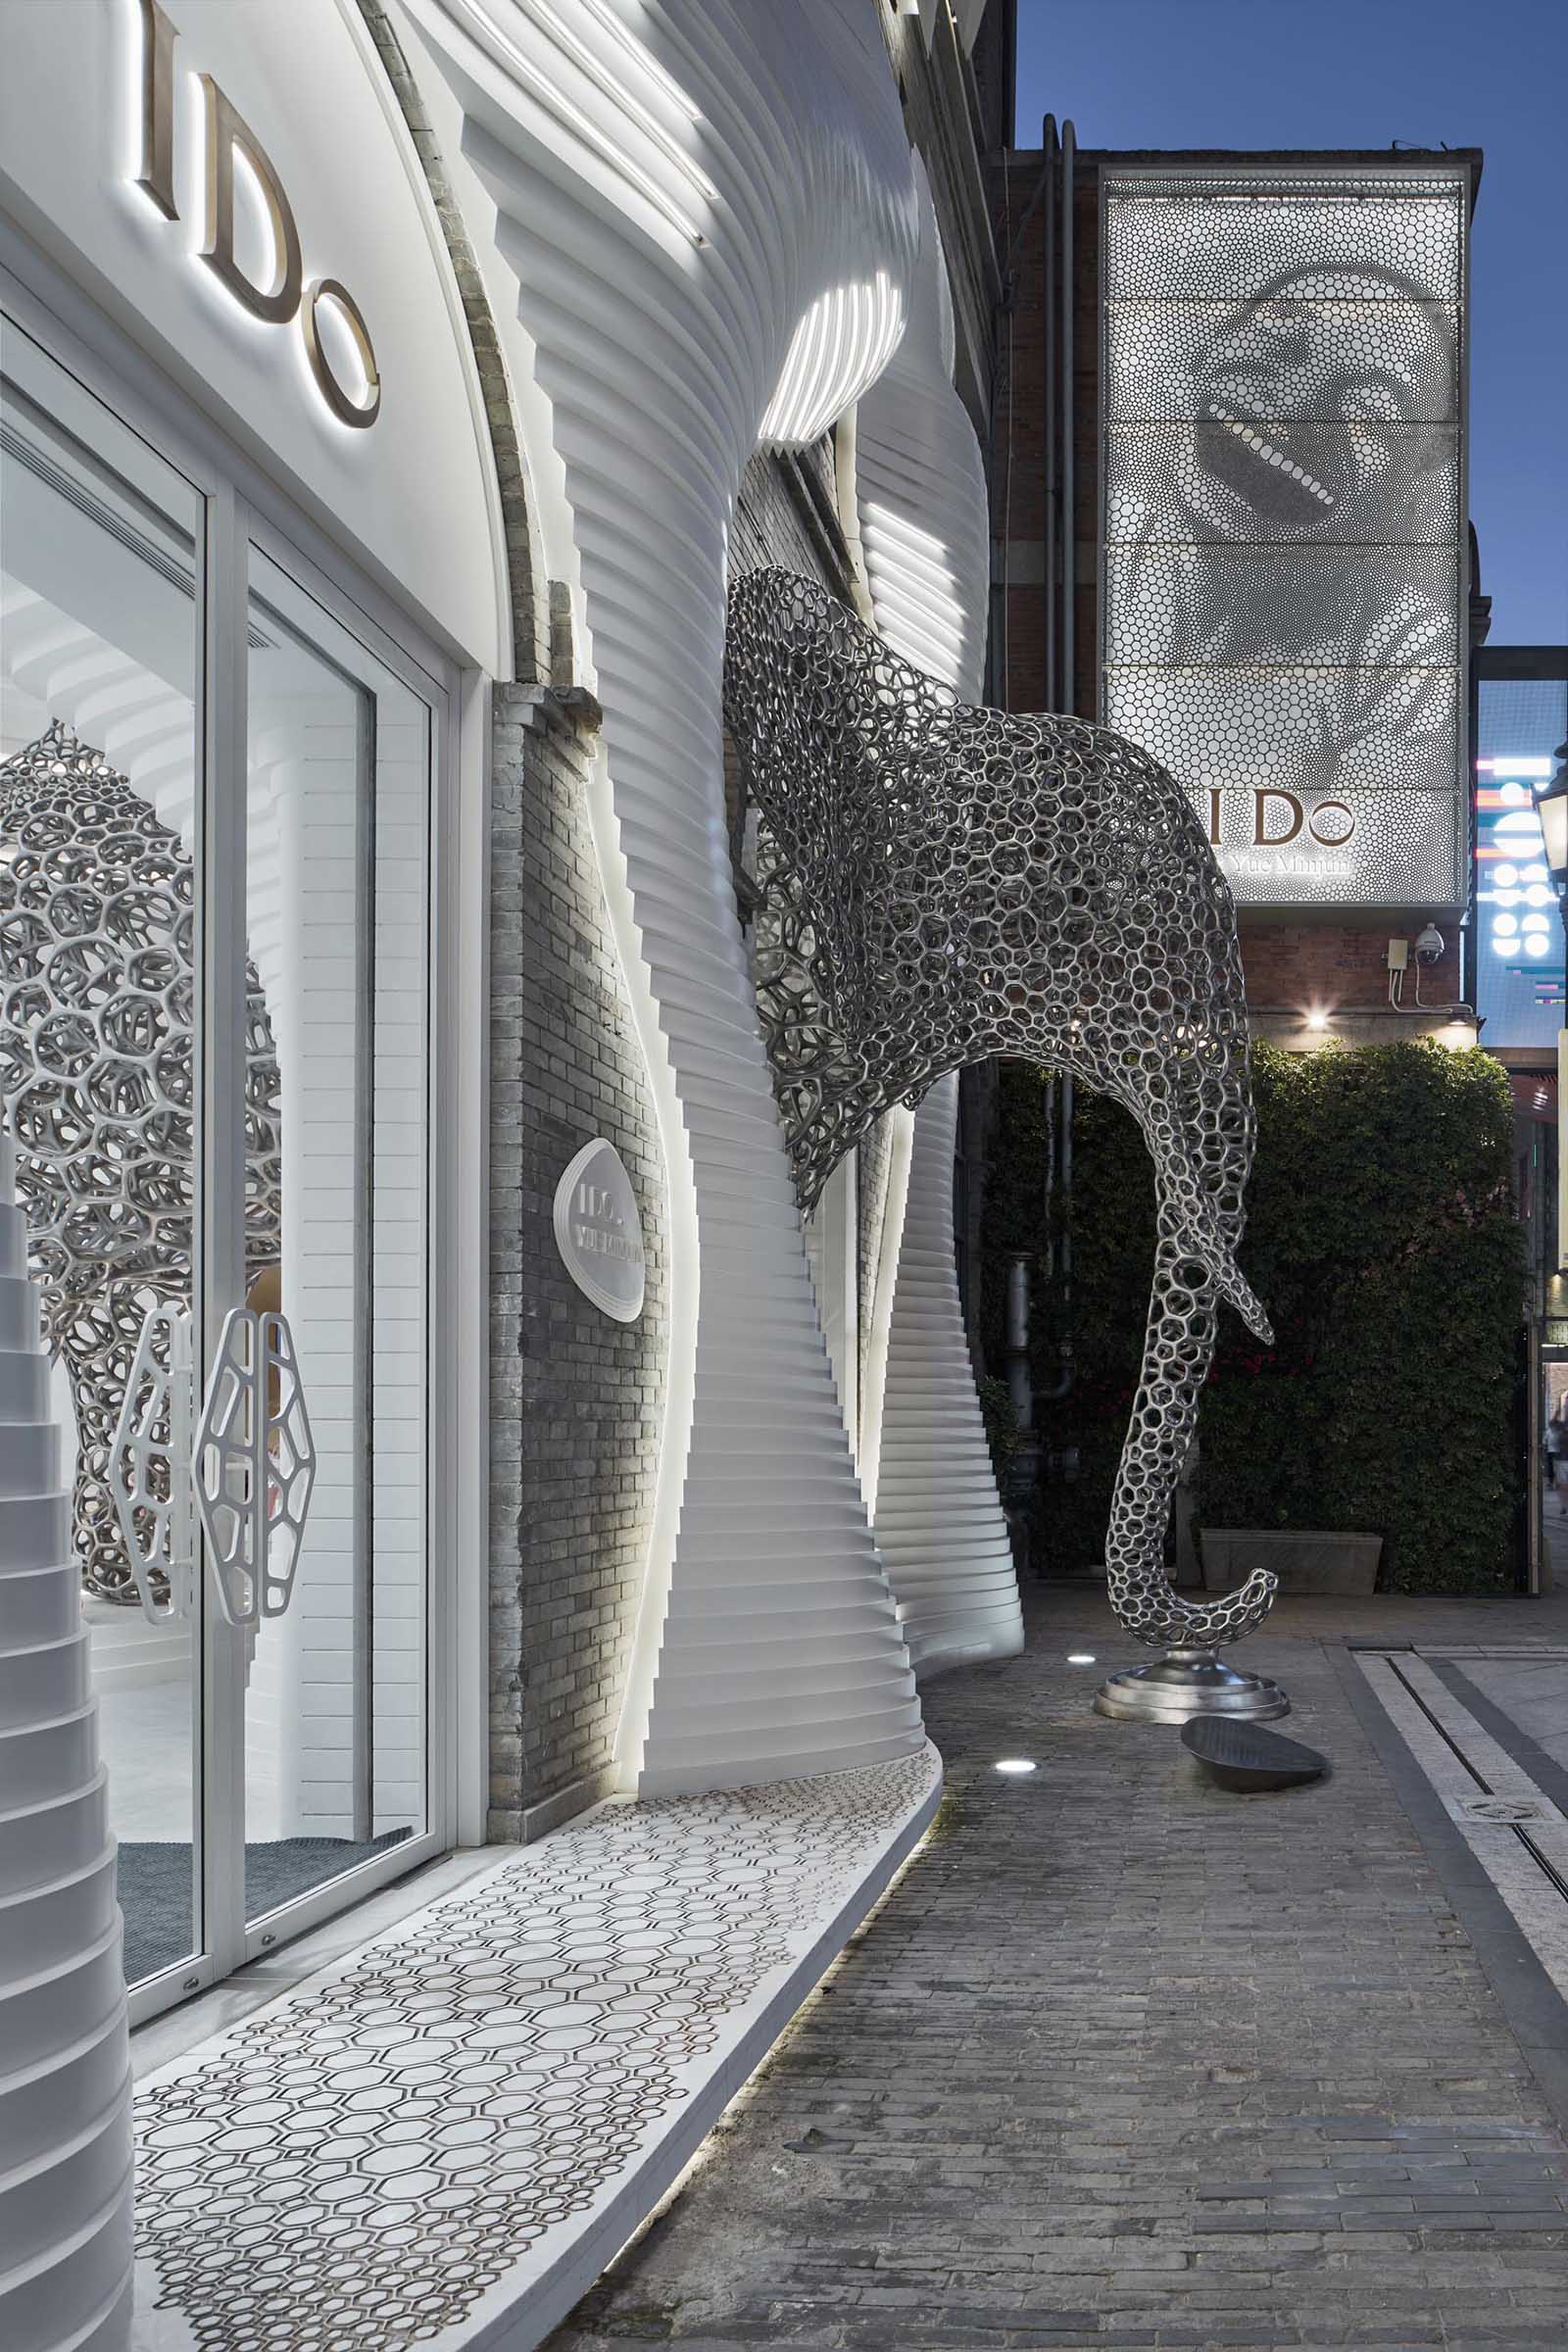 A modern retail store with an eye-catching facade, large sculptures, and a cave-like interior.